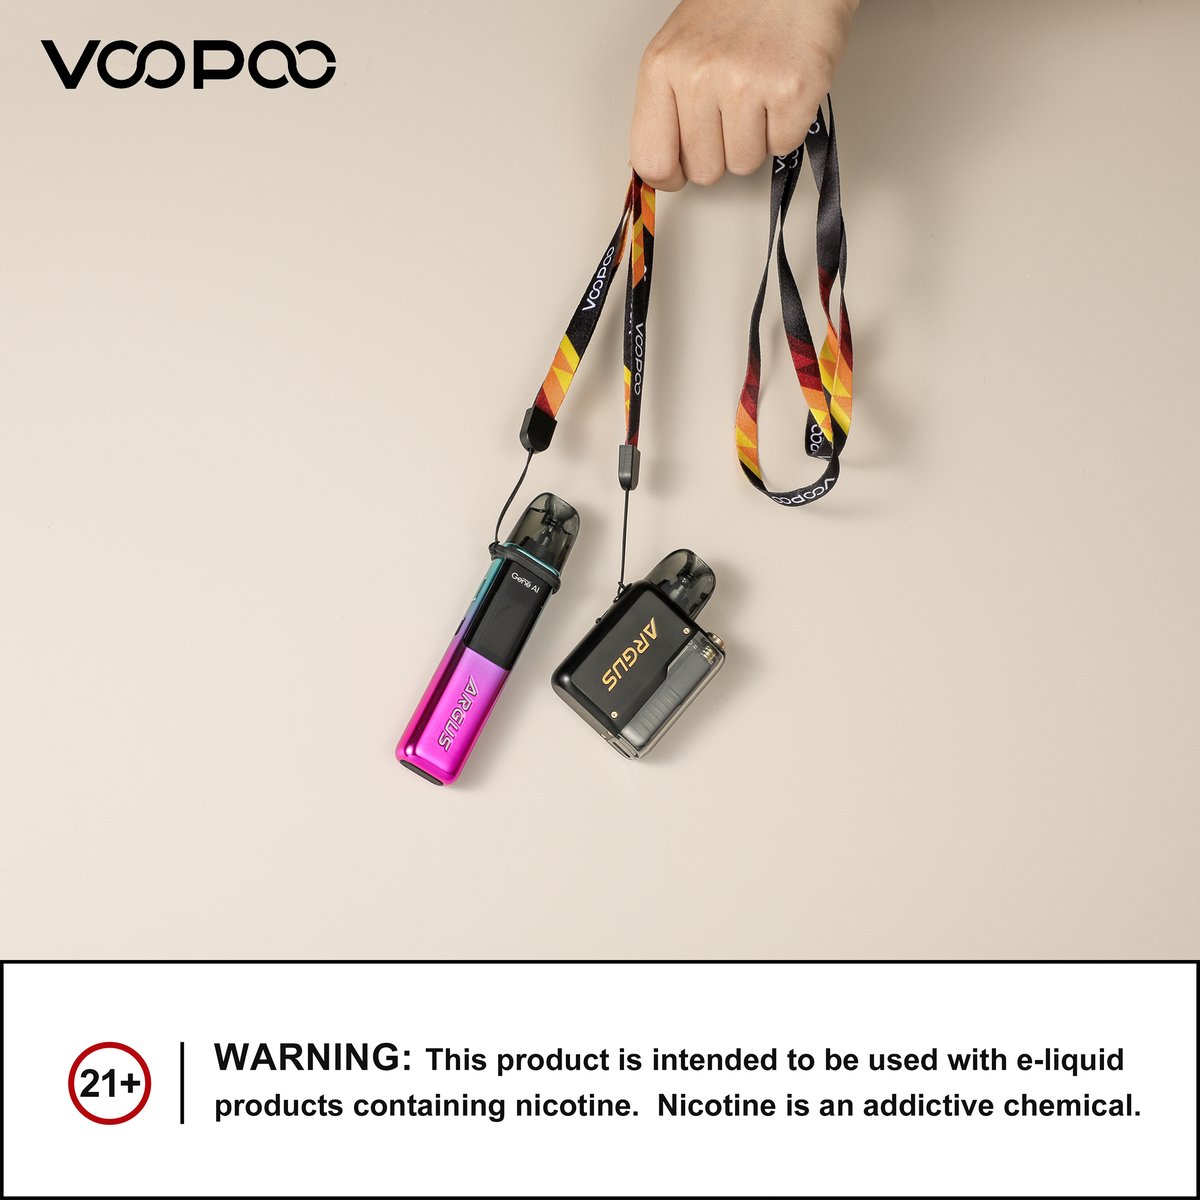 The ARGUS P2 and ARGUS G2 come with a lanyard to take our devices with you and enjoy a convenient and relaxing vaping experience all day!🔥😎

 #voopoo #argusp2 #argusg2 #voopoofamily #vapelife #VapeCommunity #newproduct